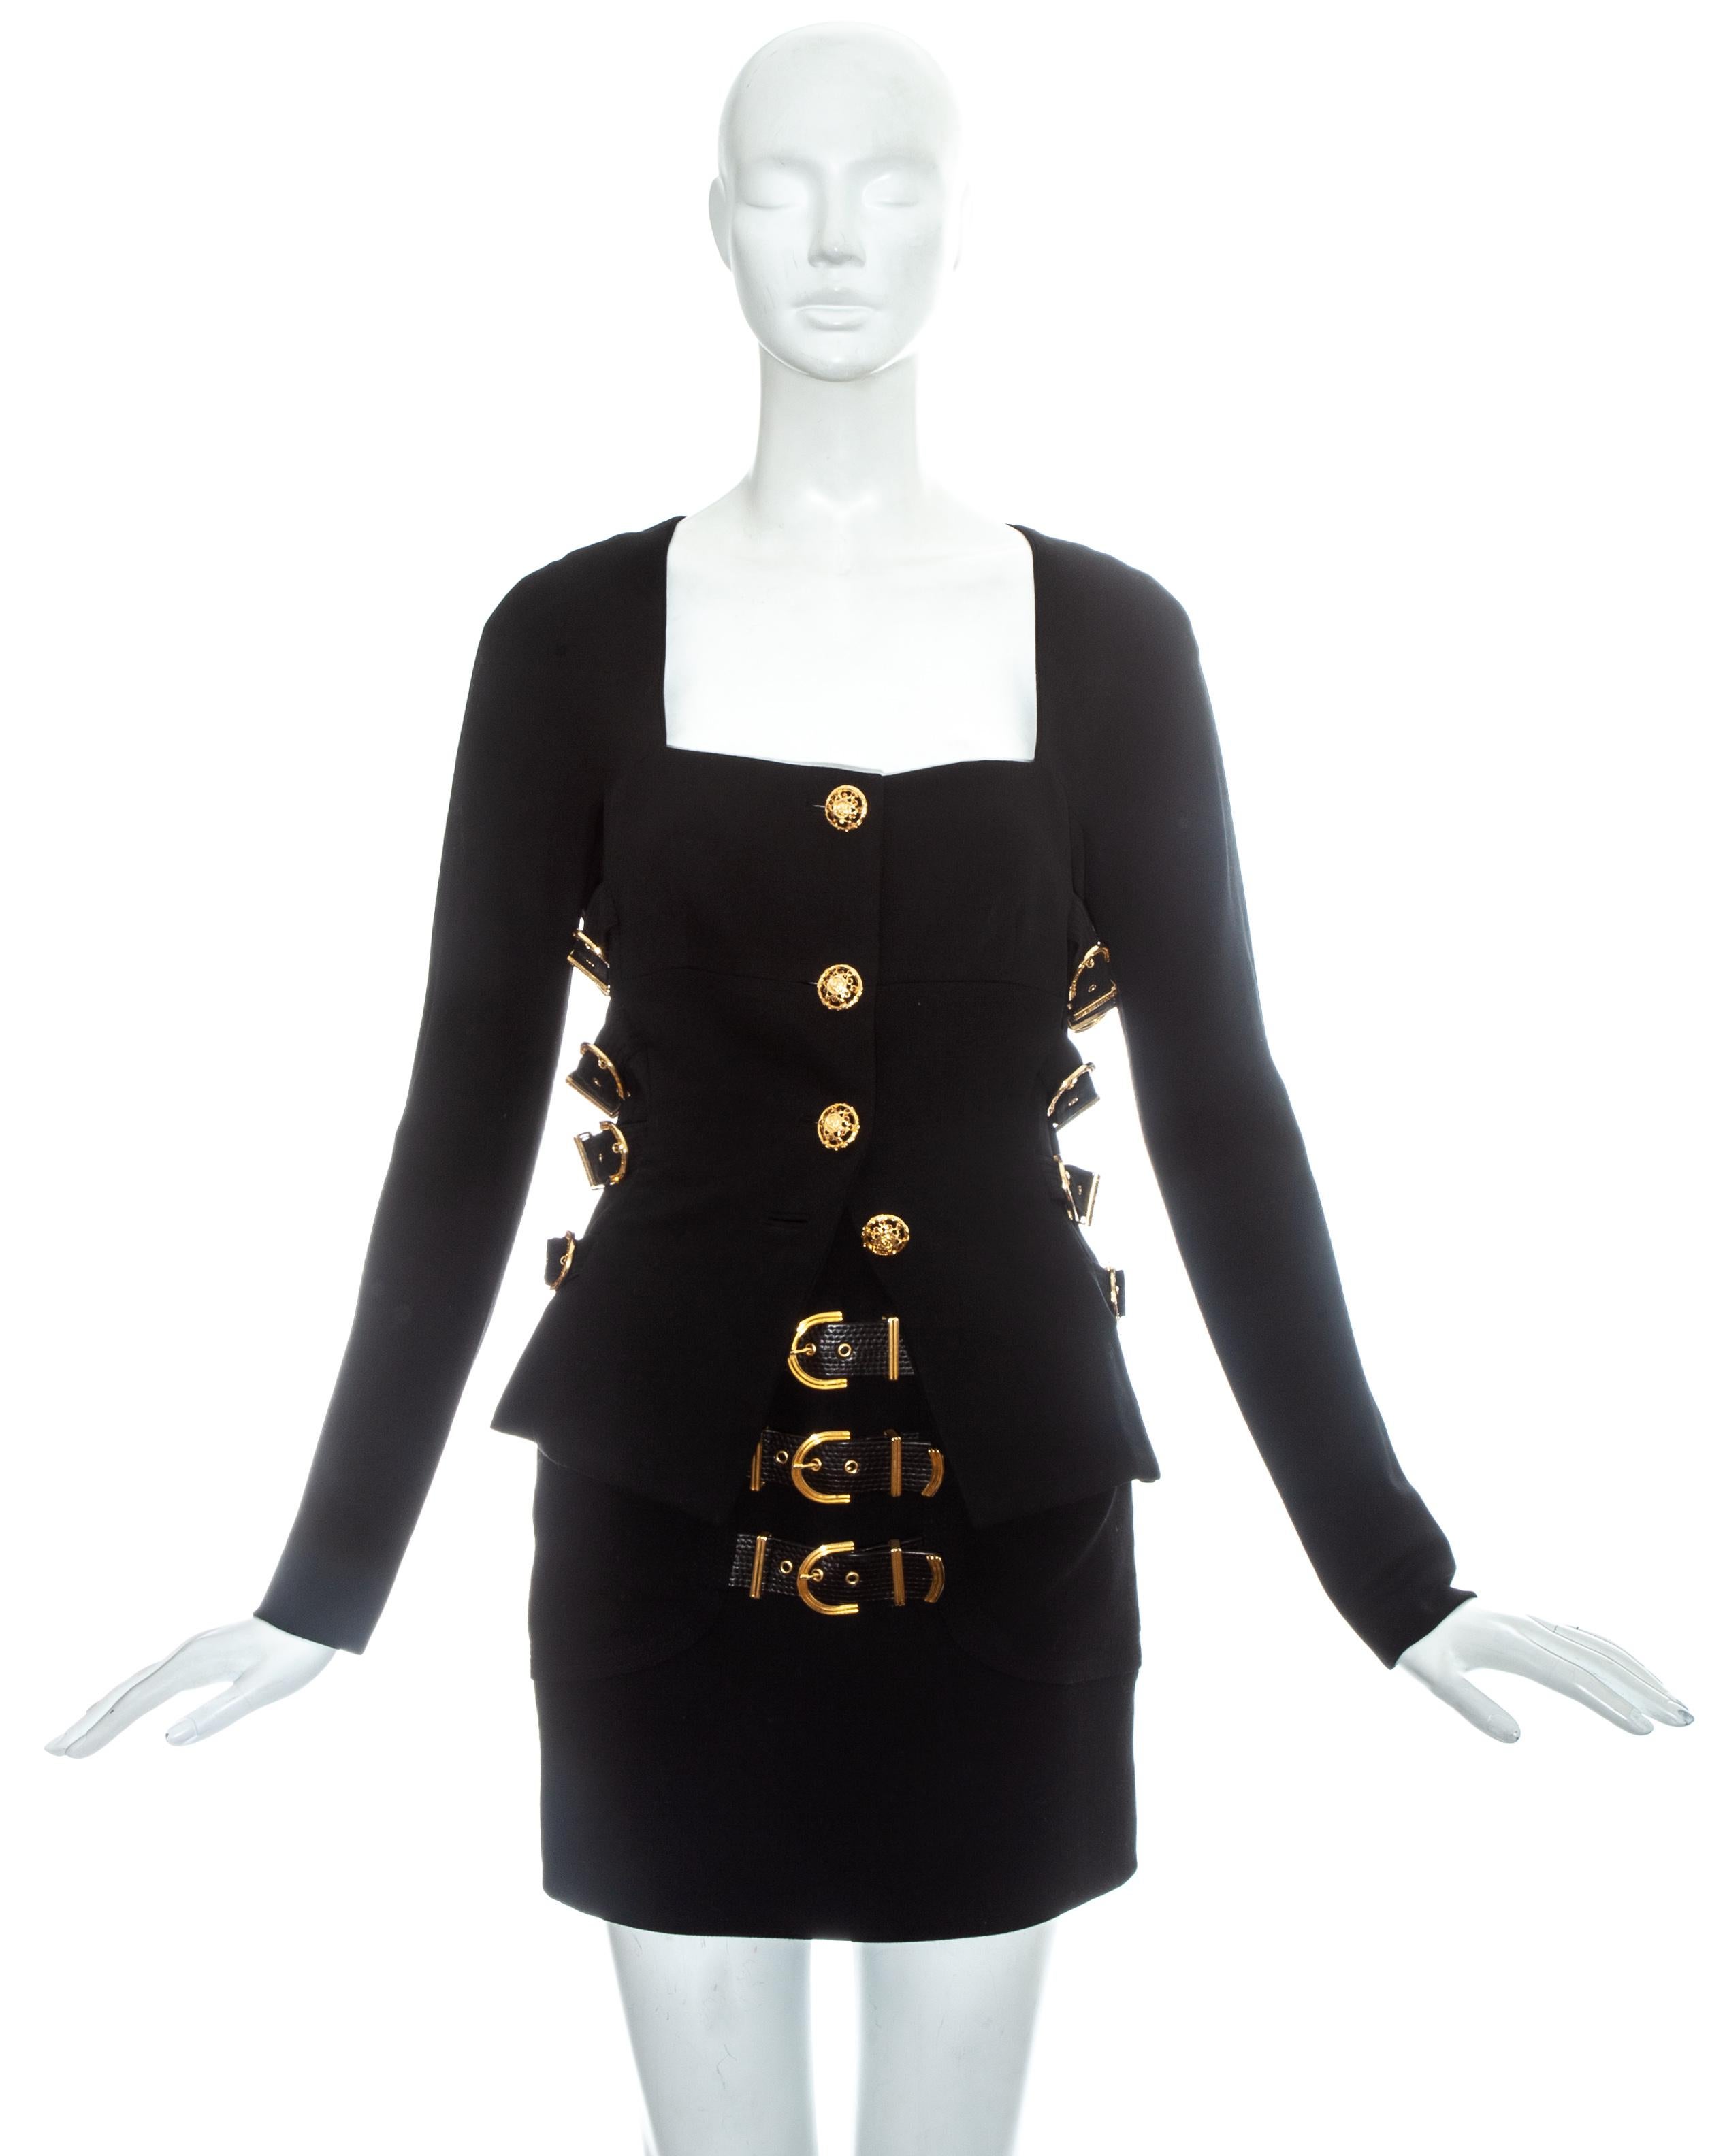 Gianni Versace black wool skirt suit with signature Versace gold bondage buckles.

Fall-Winter 1992